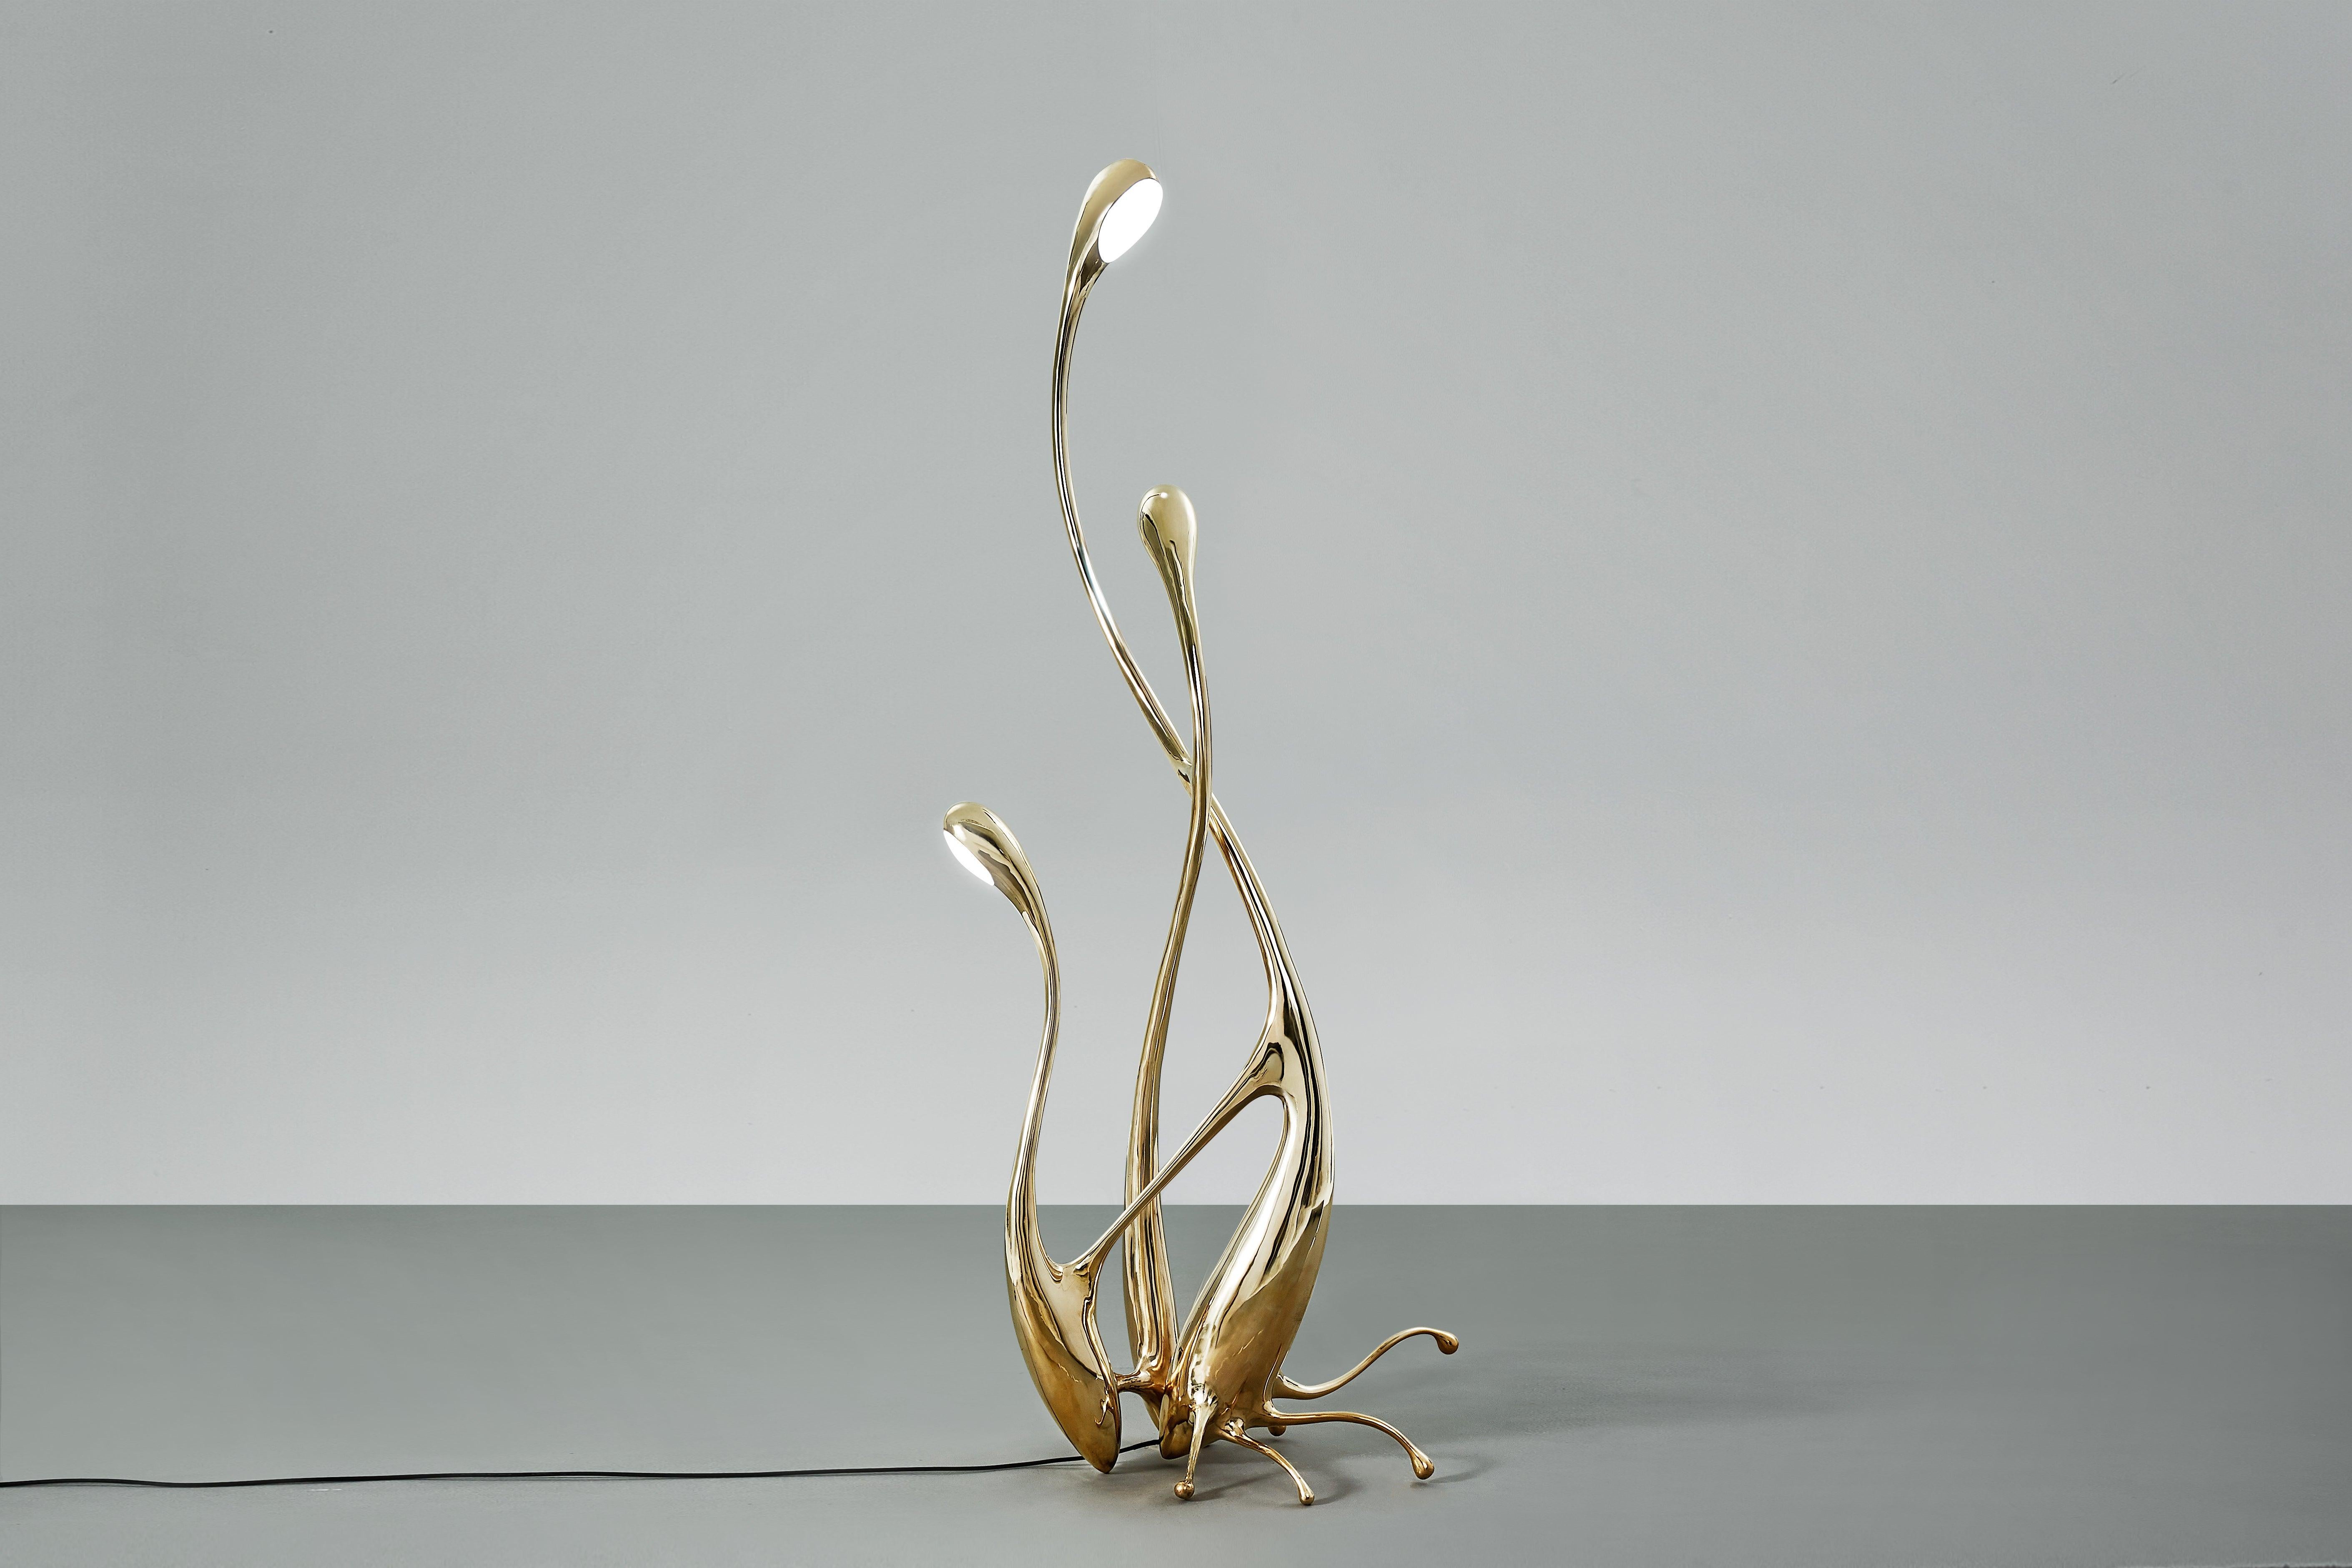 Chinese Walking Floor Lamp Polished or Matte Brass Gold Lighting Customizable For Sale